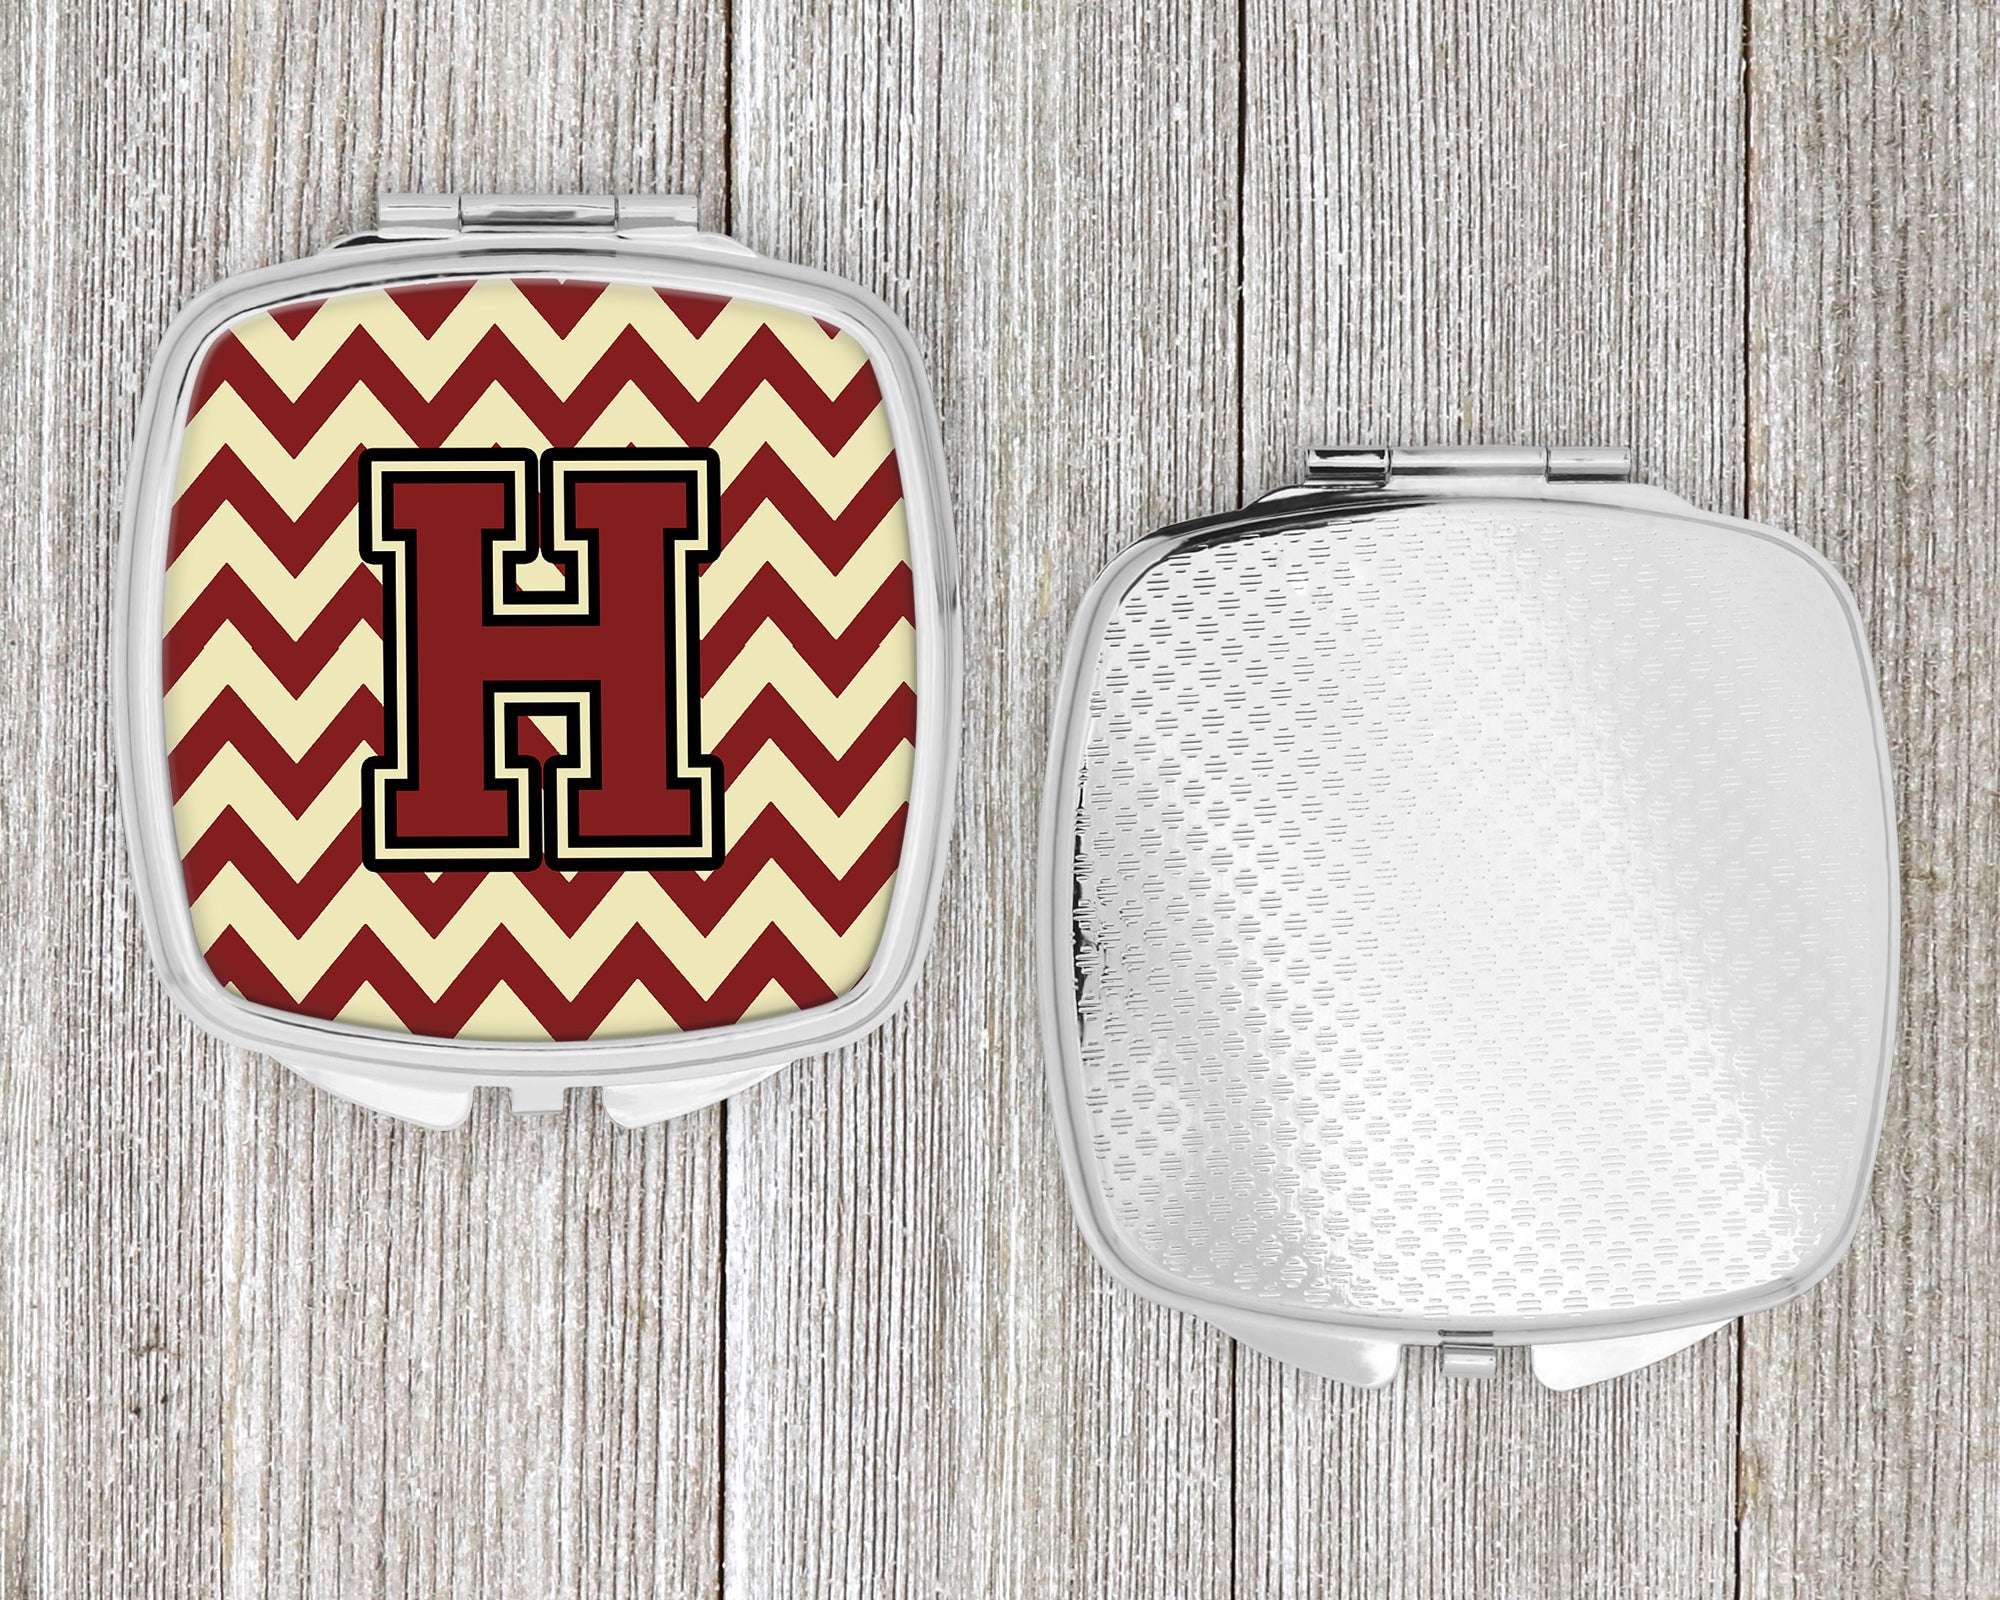 Letter H Chevron Maroon and Gold Compact Mirror CJ1061-HSCM